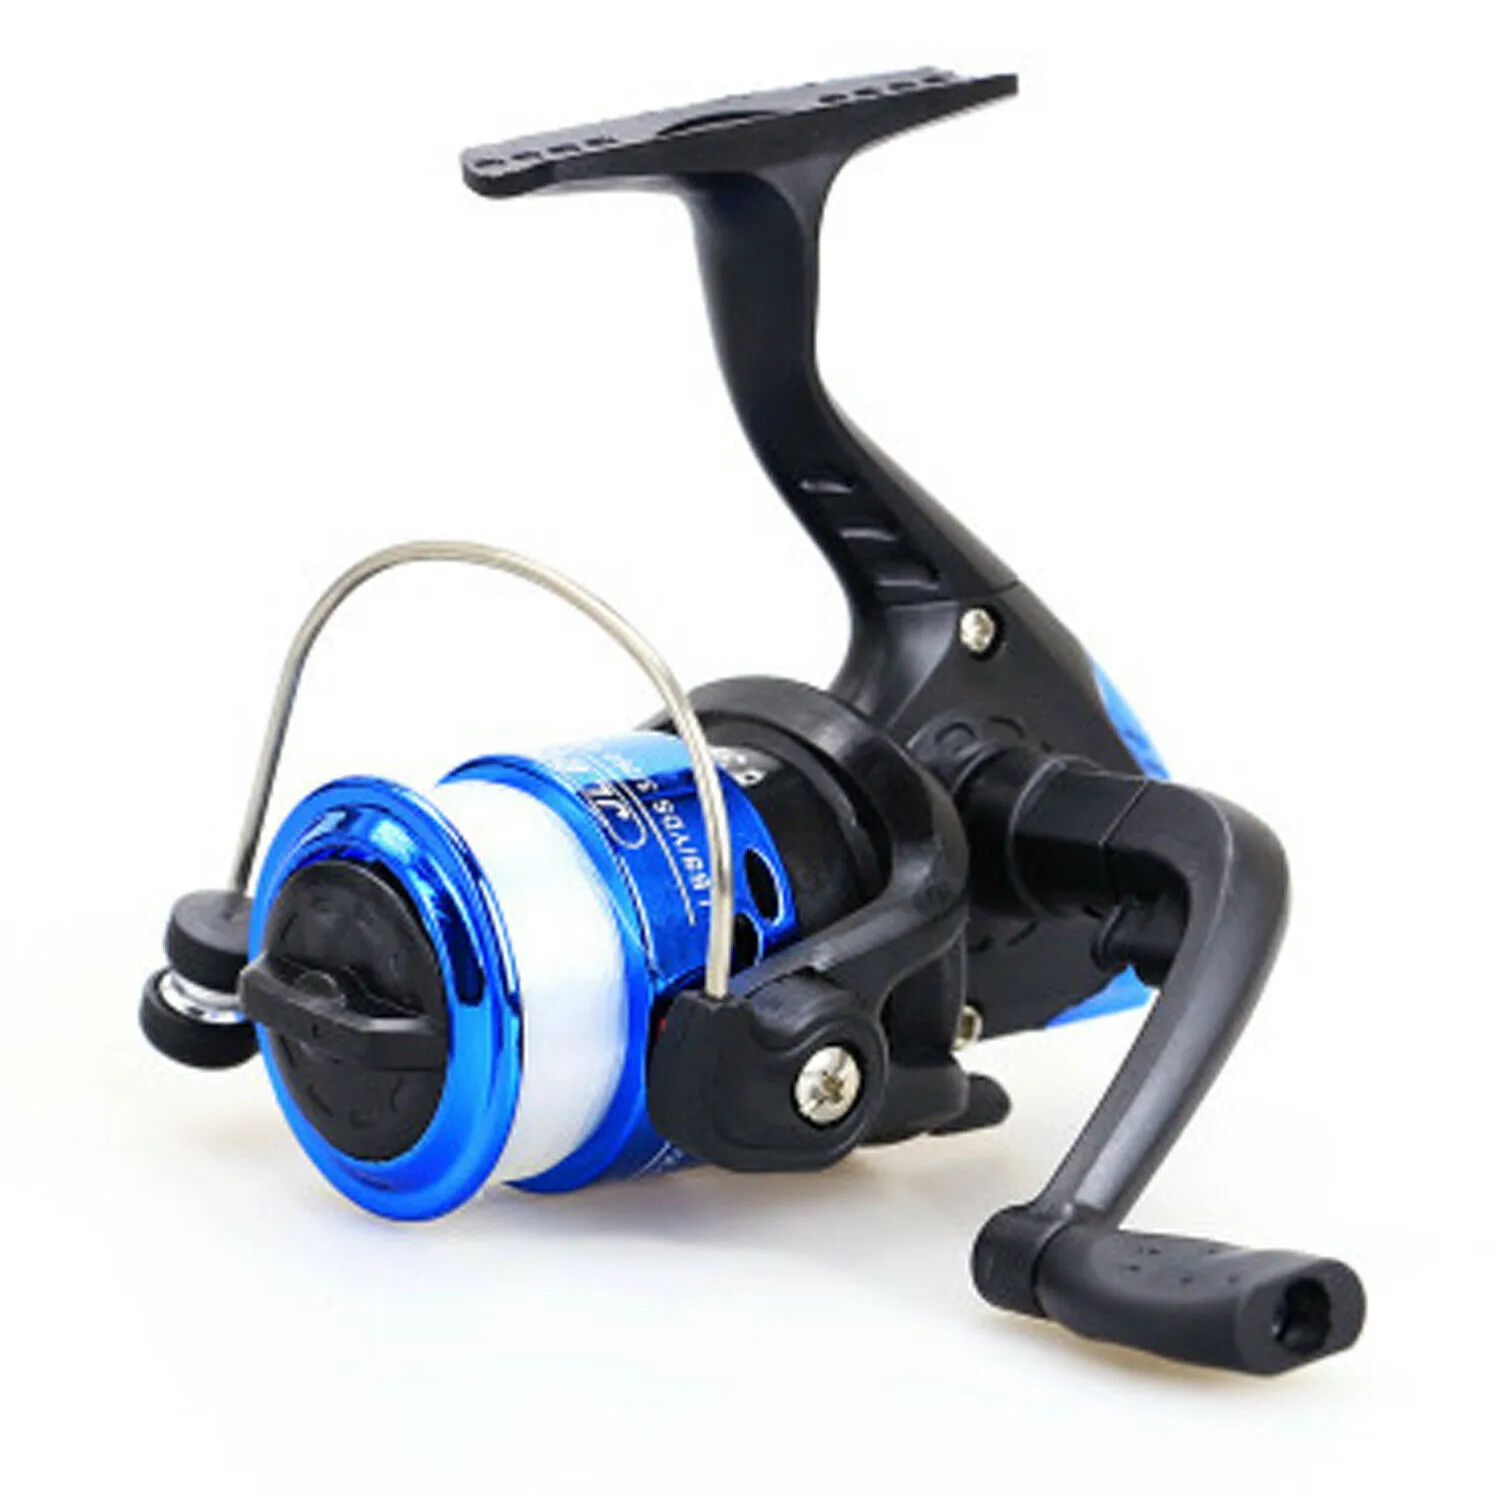 3BB Spinning Fishing Reel With Clear Mono Line Freshwater Saltwater Fishing  Reel China Fishing Tackle Supplier From Enjoyoutdoors, $6.12